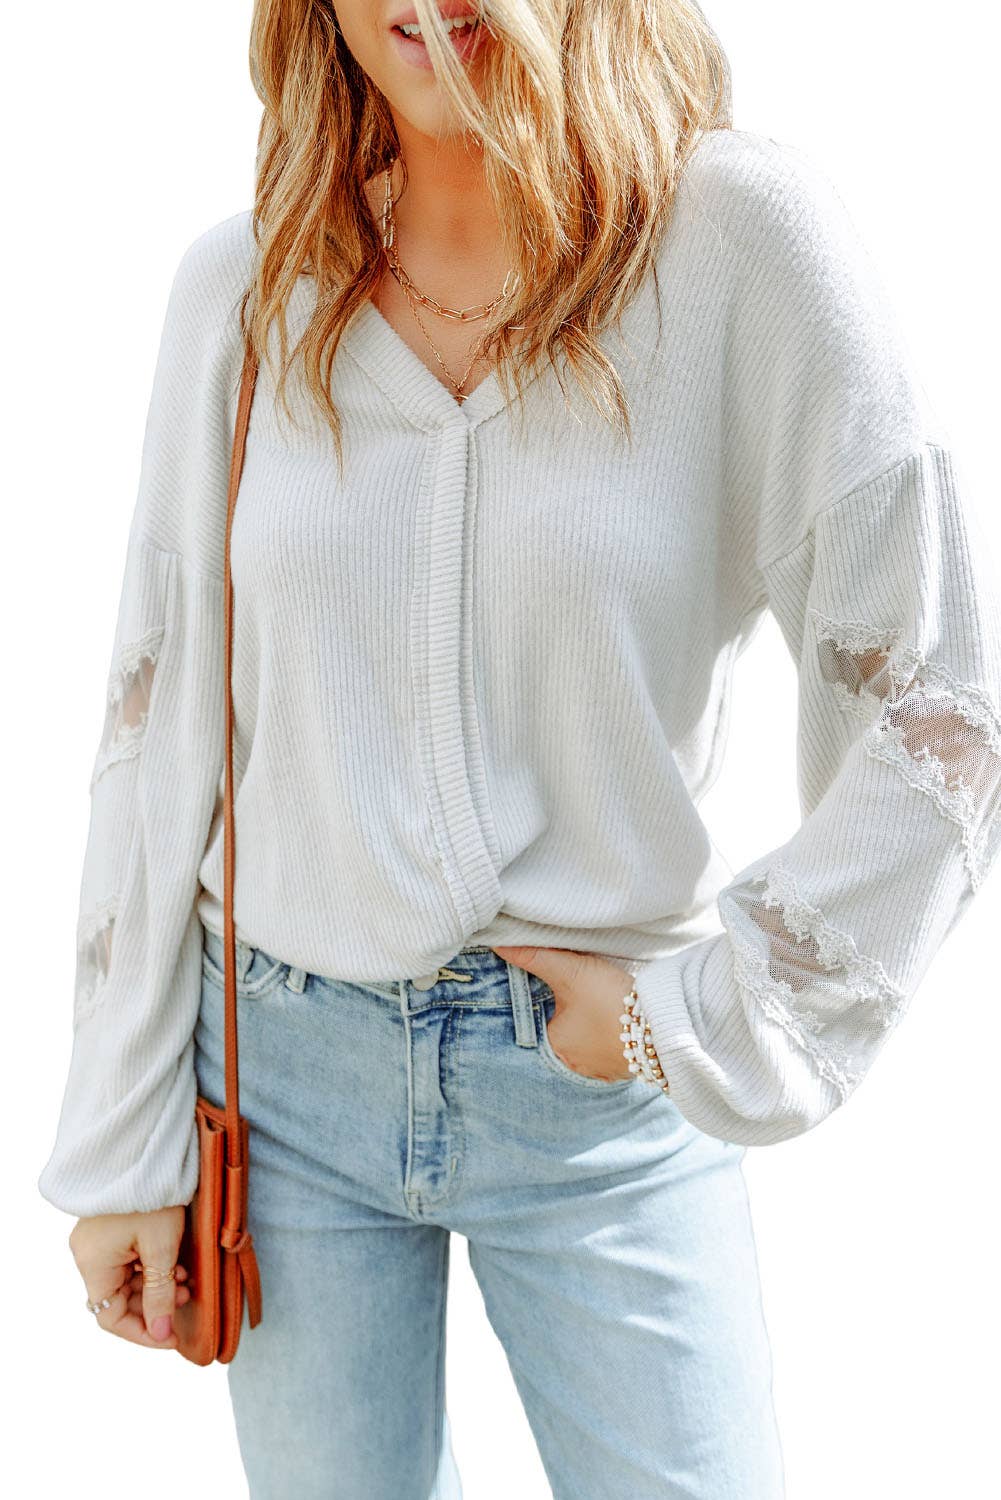 Lace Patchwork Drop Sleeve Ribbed Casual Top: M / WHITE